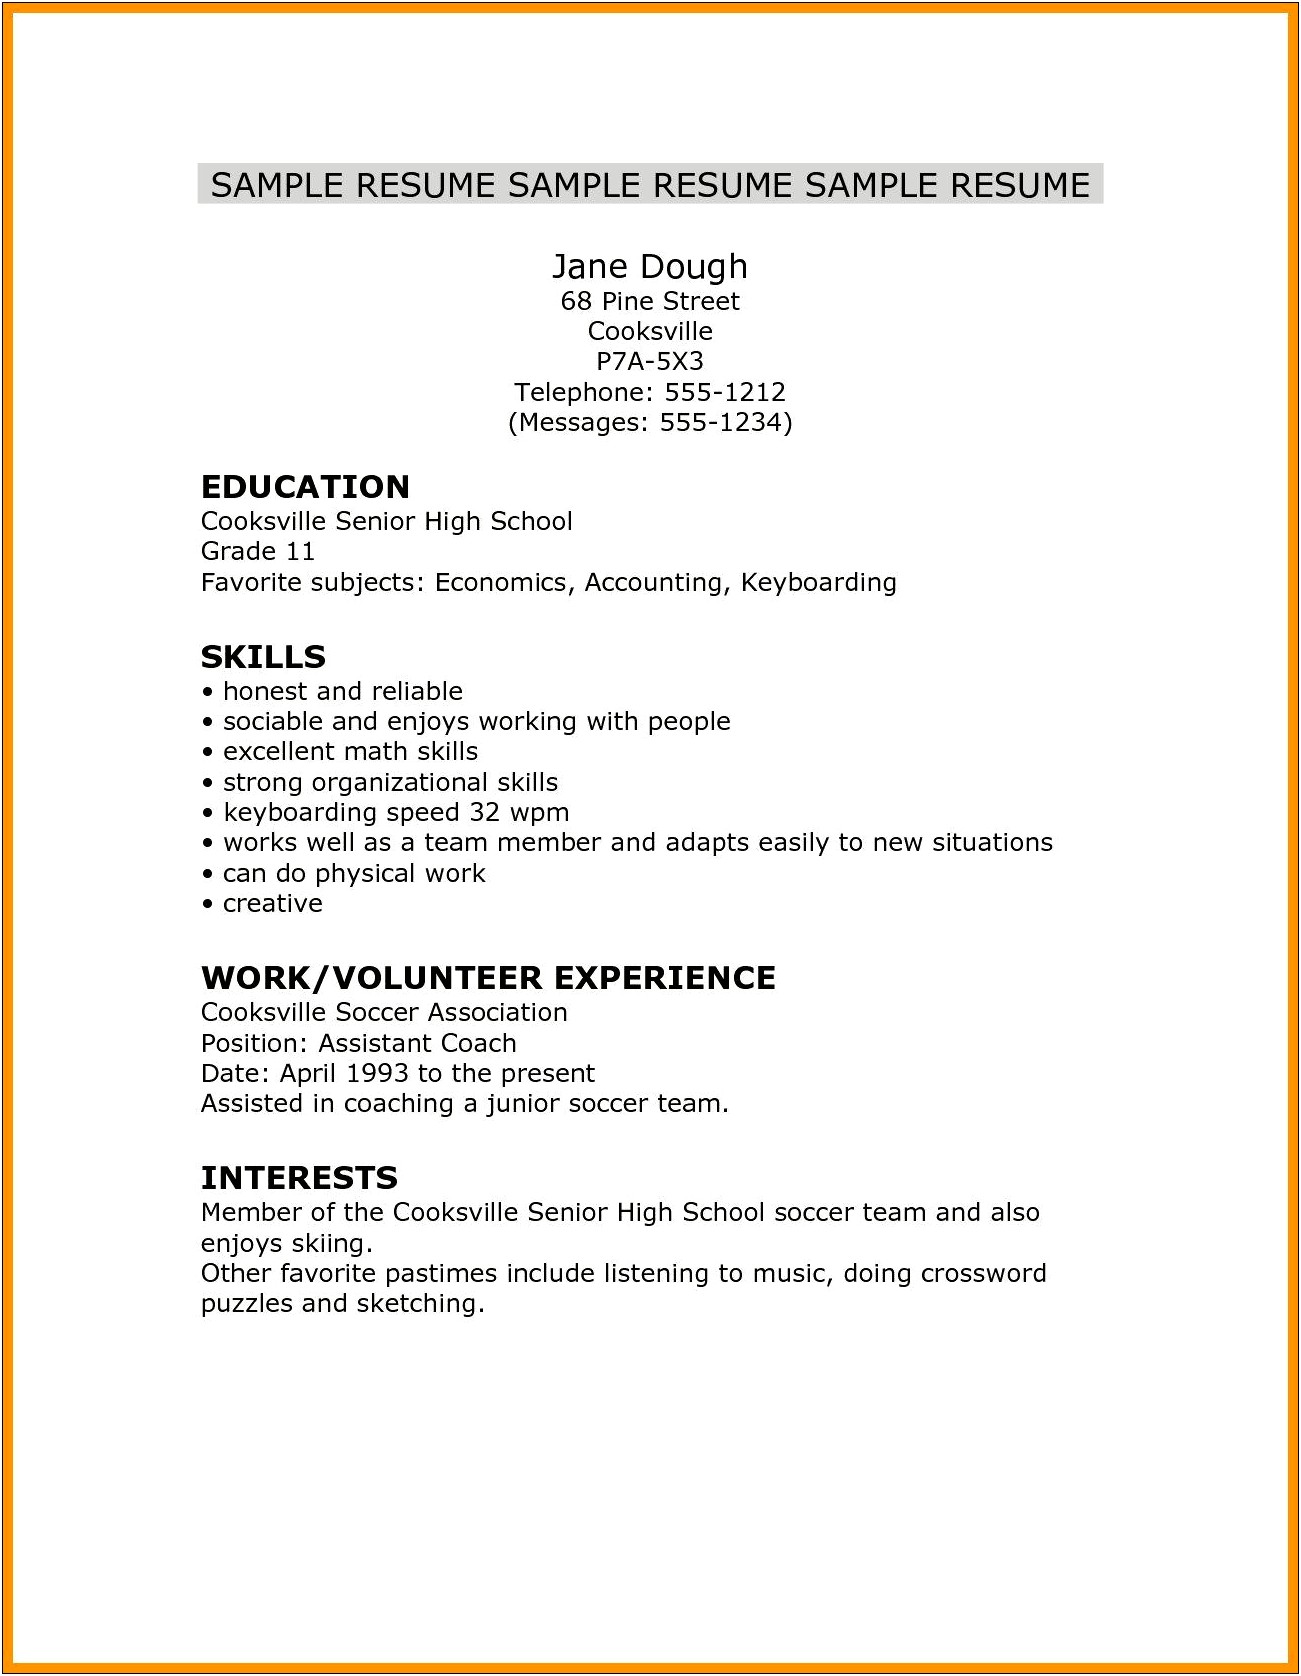 Resume Template For Student Applying To Graduate School